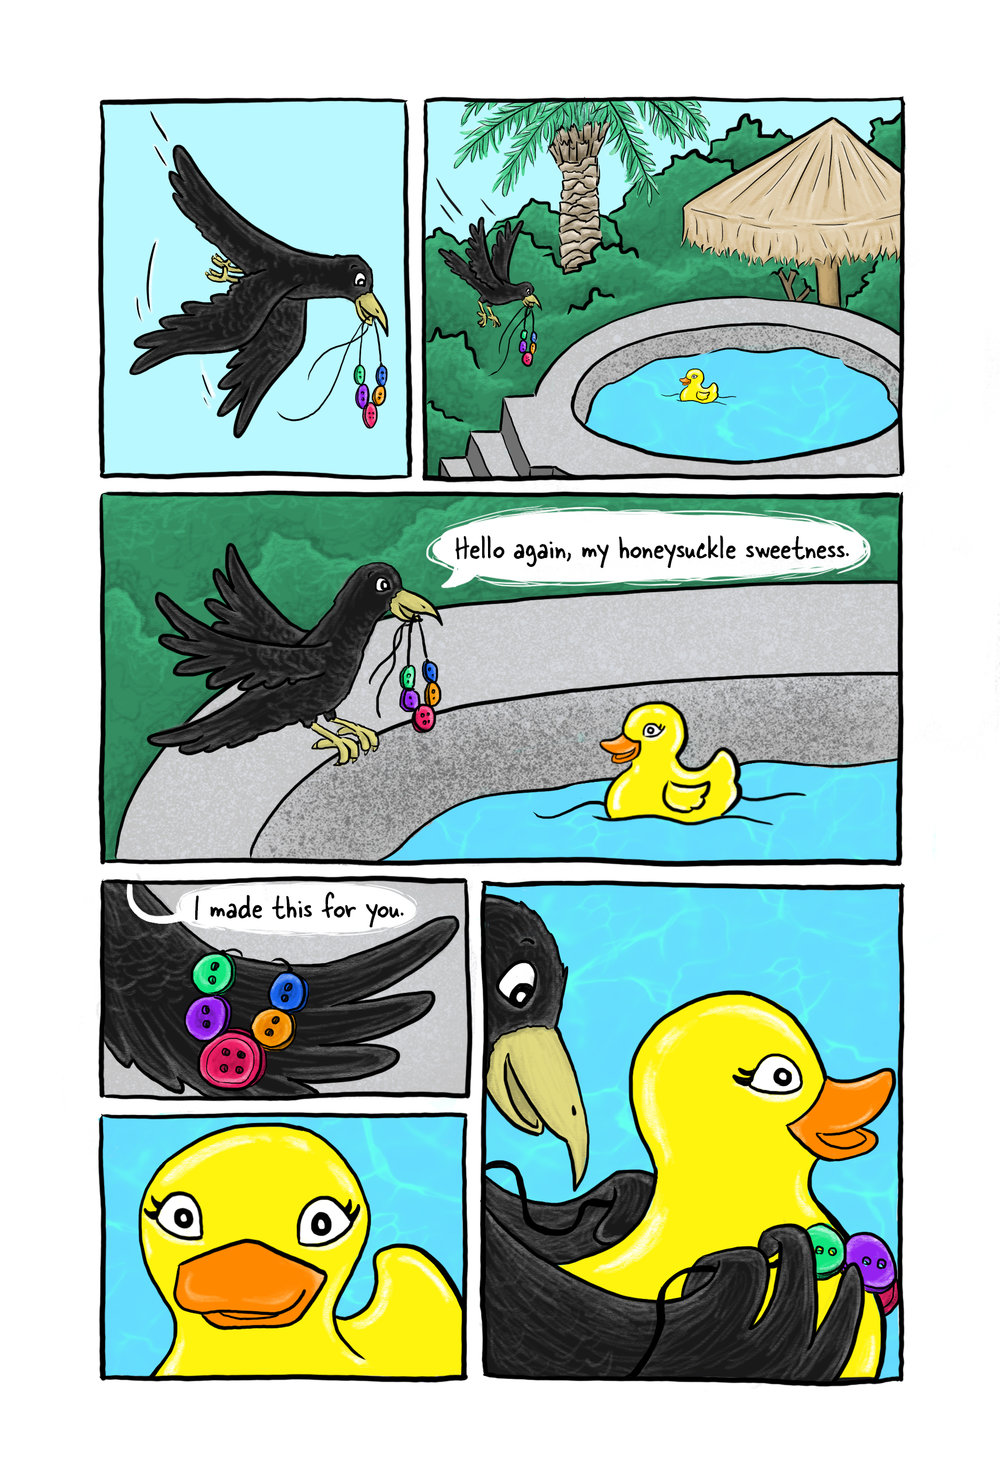 Page 4 Mr. Buttons gives a button necklace to the duck who he has a crush on